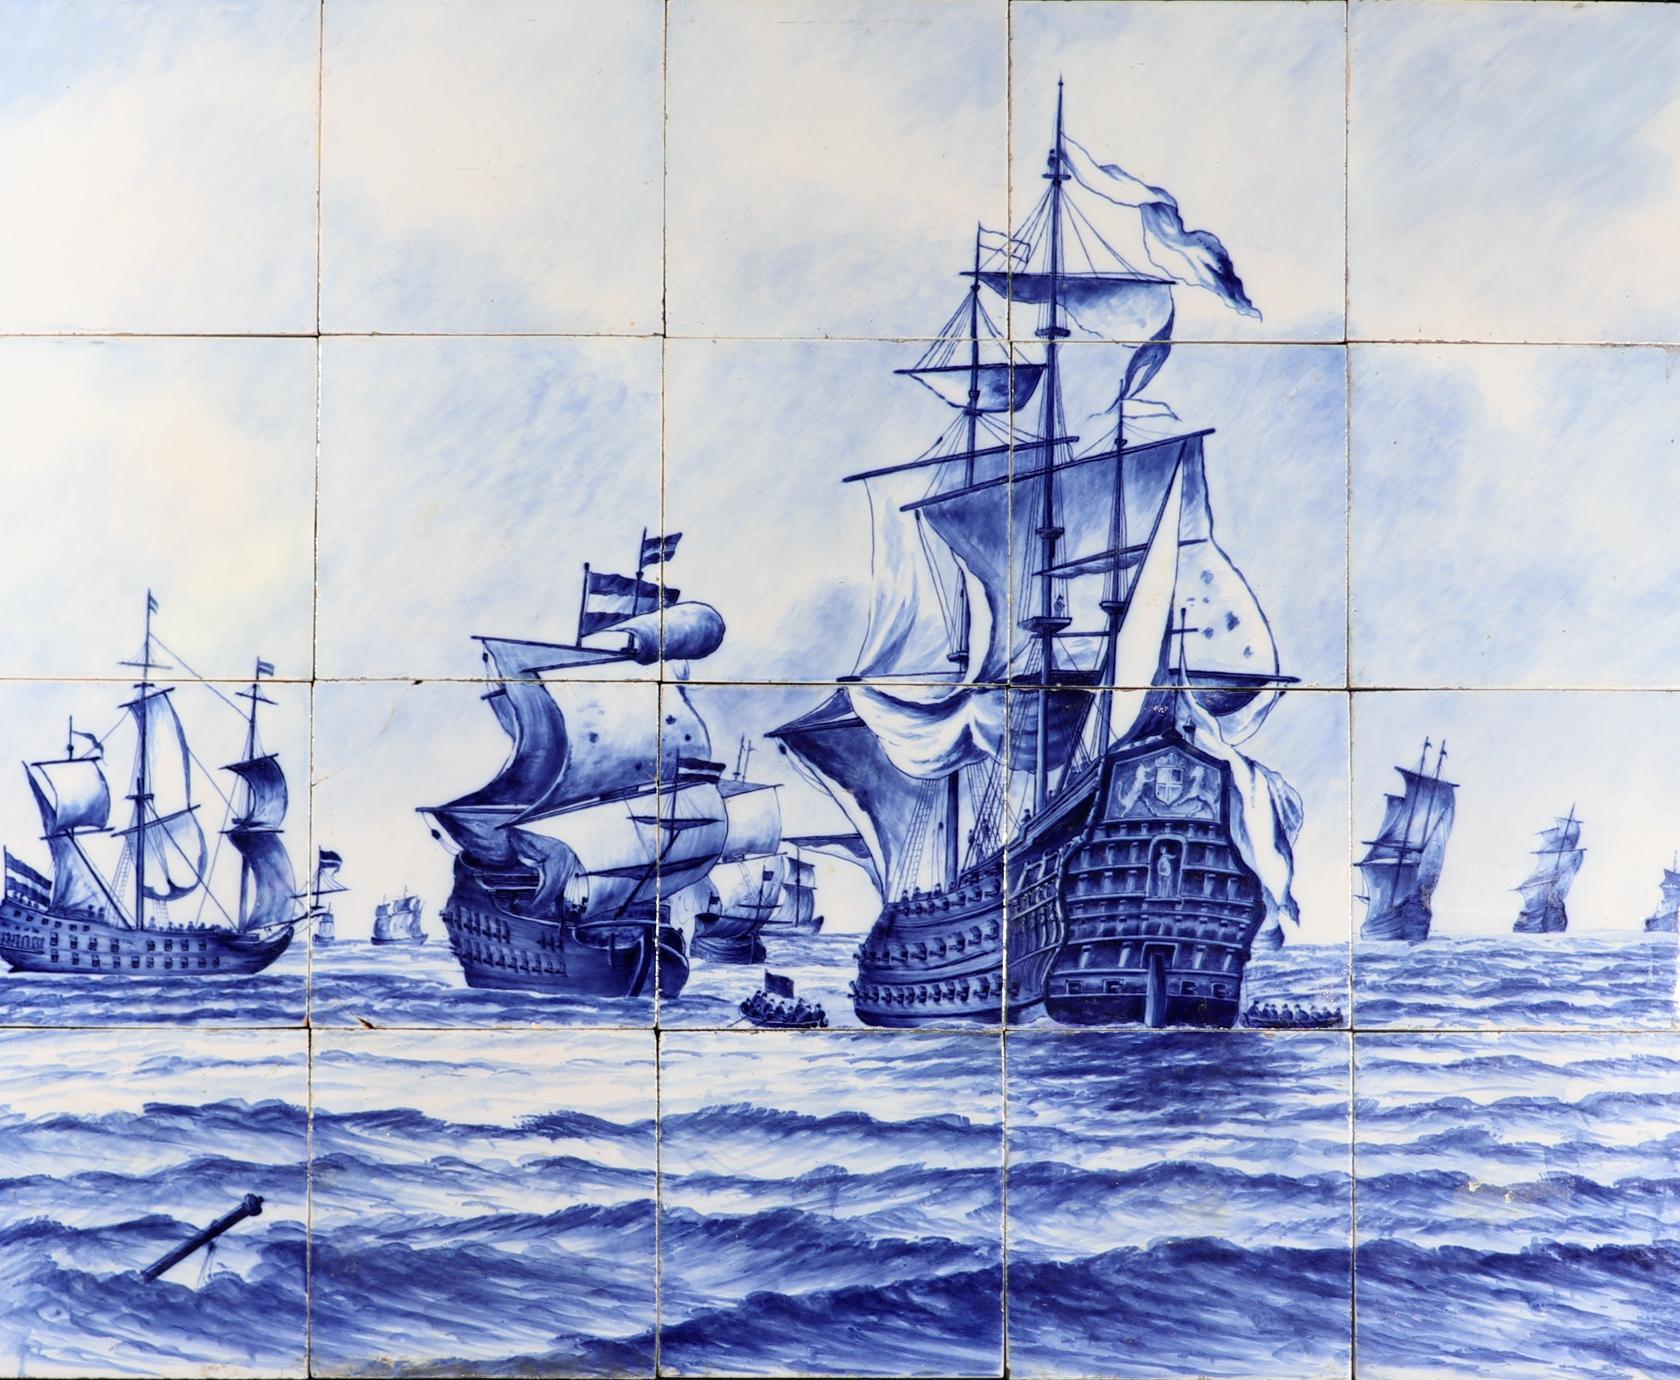 Dutch Delft Tile Large Picture of A Fleet of Ships,
19th Century

The 20 tile blue & white Dutch Delft Tin-glazed Earthenware Tile picture depicts a Dutch Fleet of ships on the high sea.  There are eleven different battleships ships depicted and a